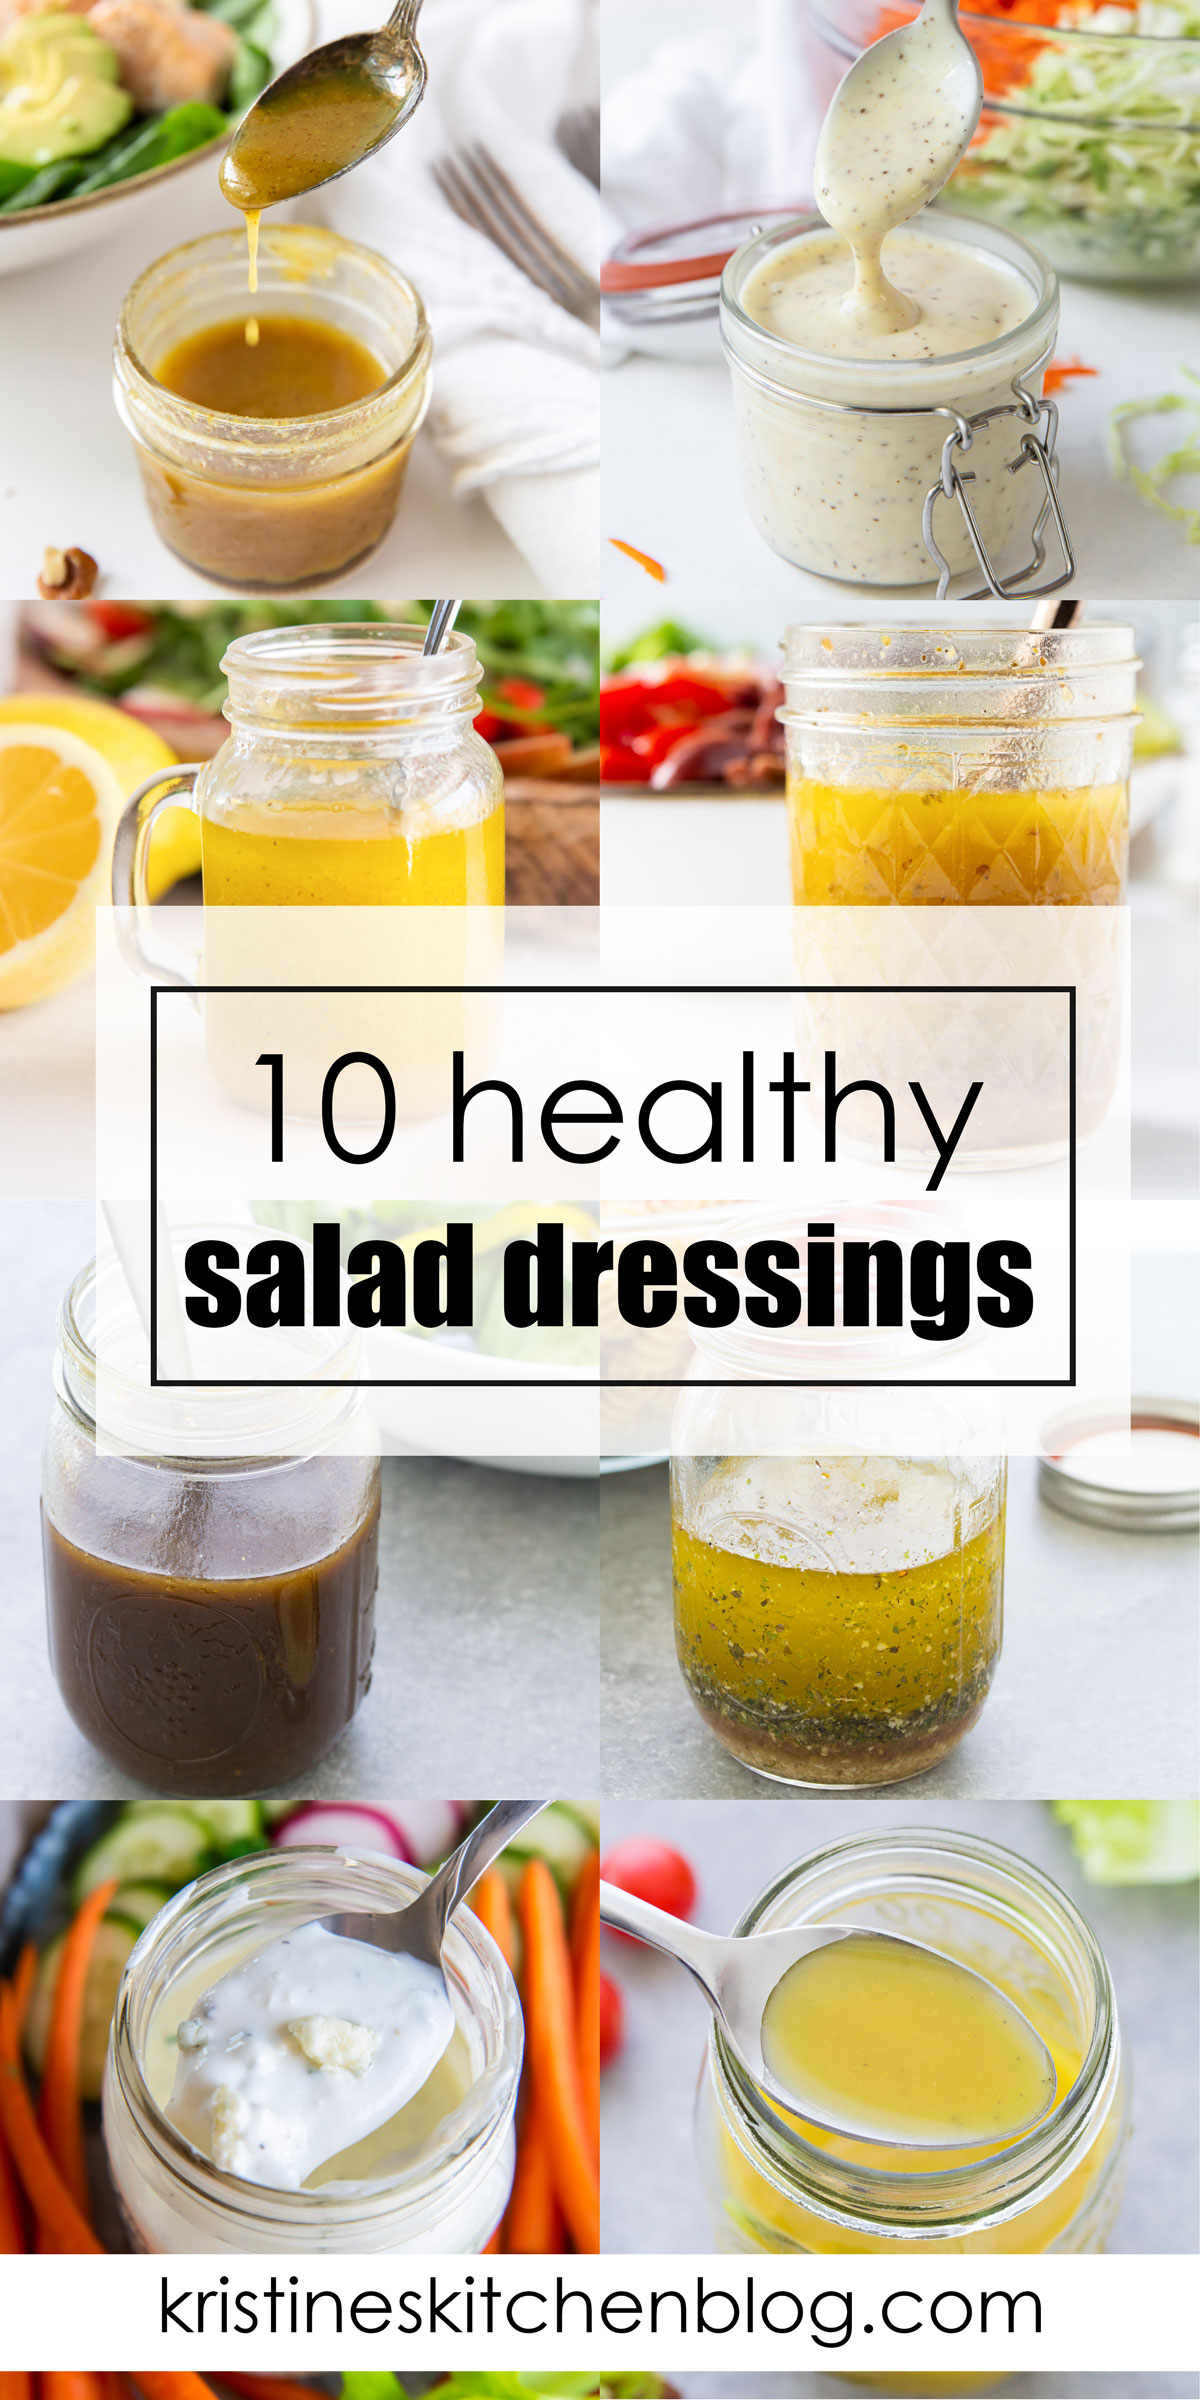 Collage of 8 photos of salad dressings.